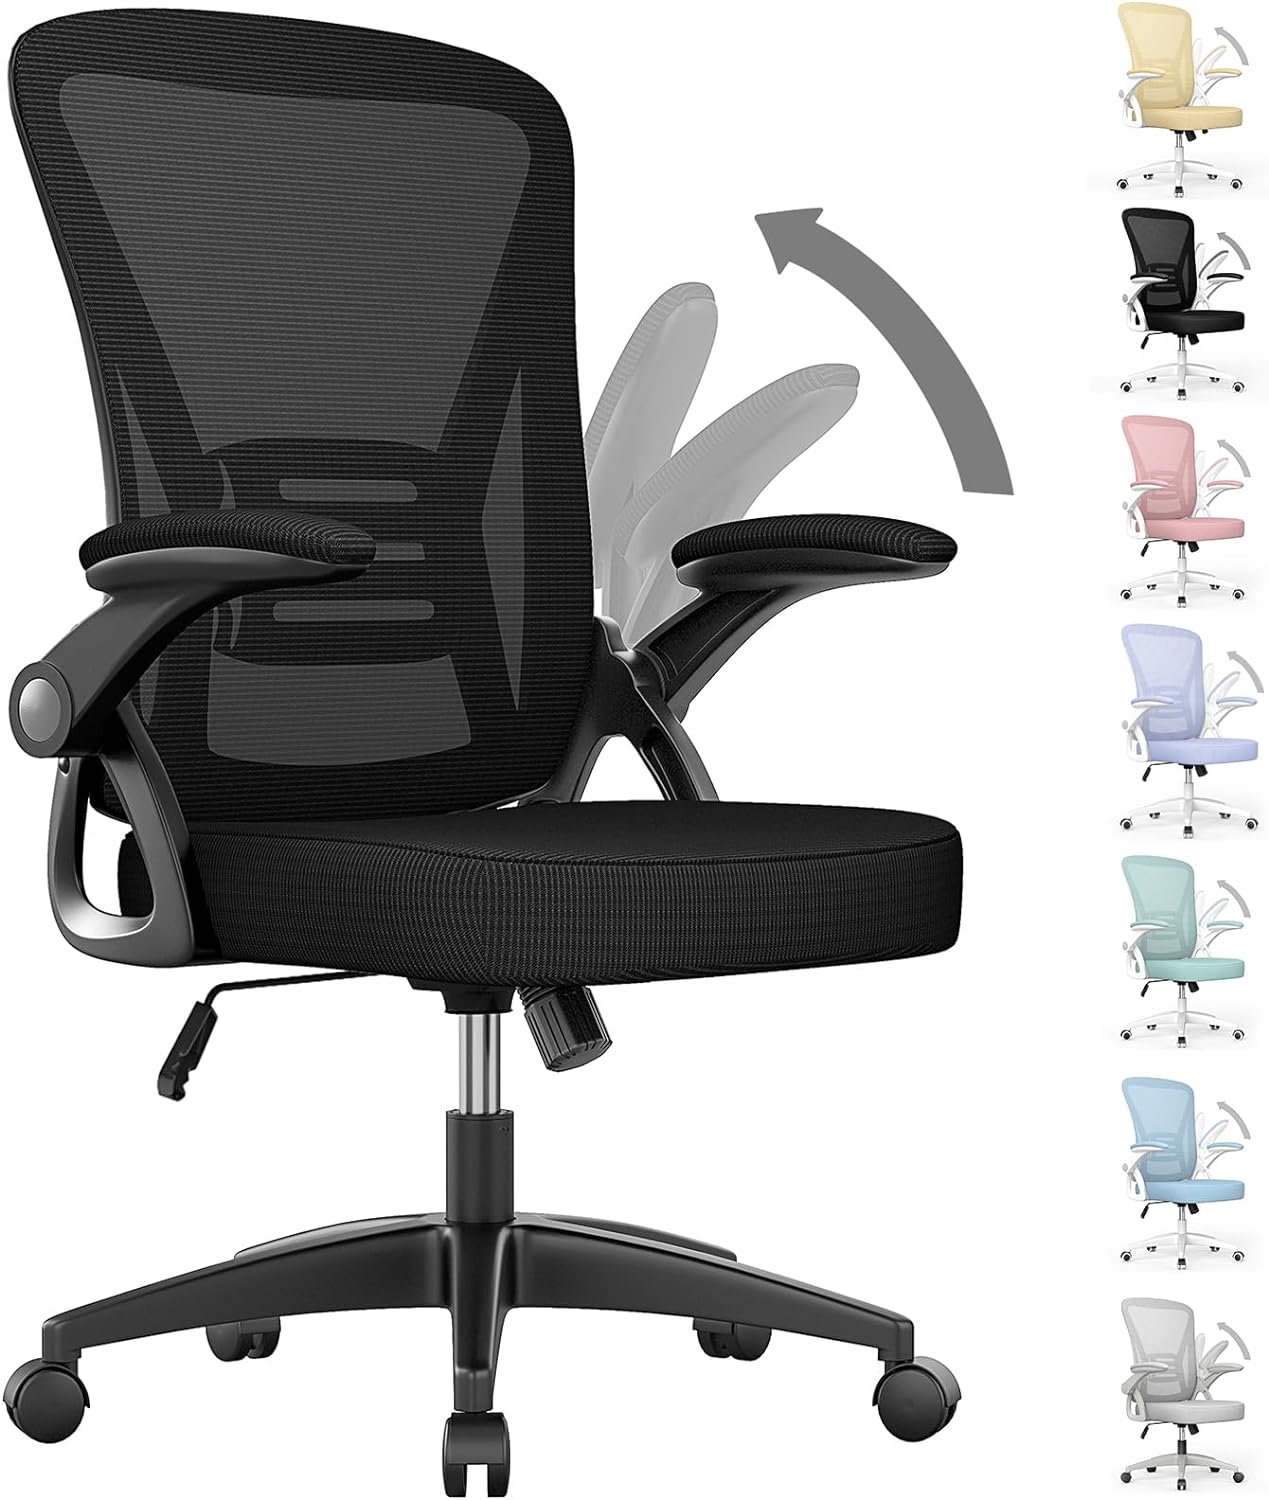 naspaluro Ergonomic Office Chair, Mid Back Desk Chair with Adjustable Height, Swivel Chair with Flip-Up Arms and Lumbar Support, Breathable Mesh Computer Chair for Home/Study/Working, Dark Black